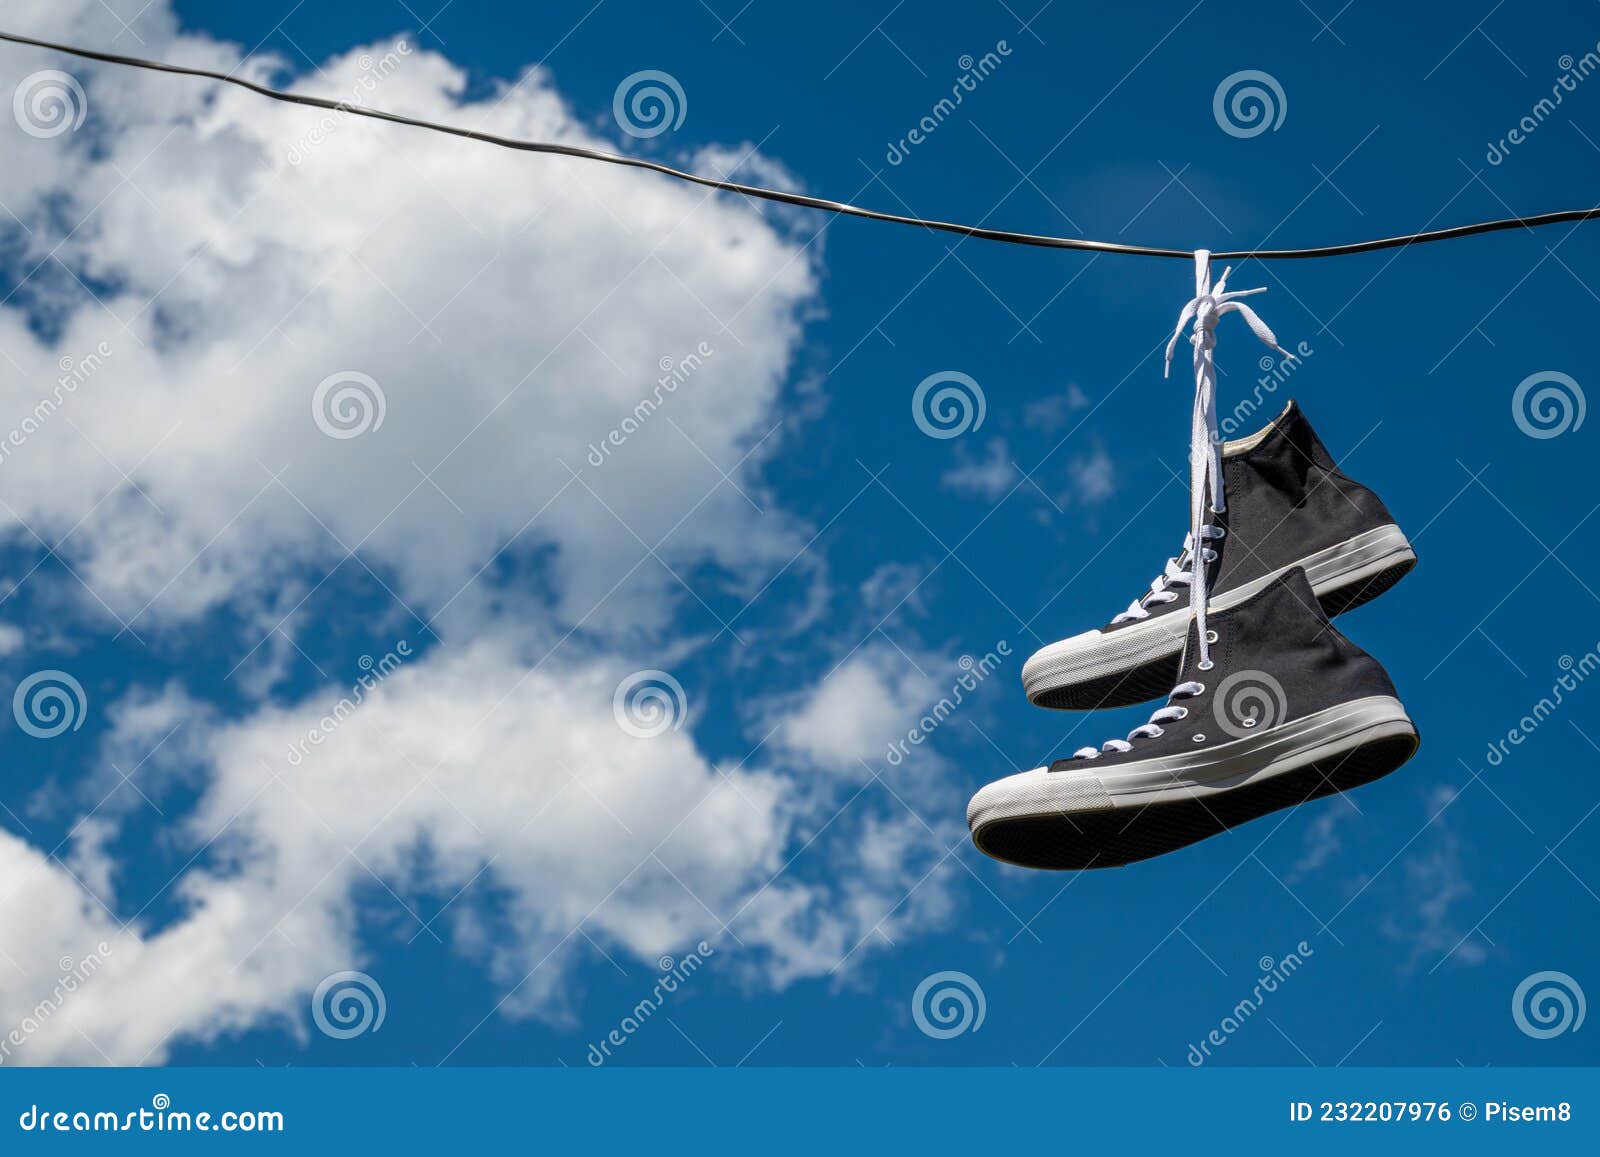 Shoe Tossing Old Sneakers Hanging On Stock Footage Video (100%  Royalty-free) 10814831 | Shutterstock